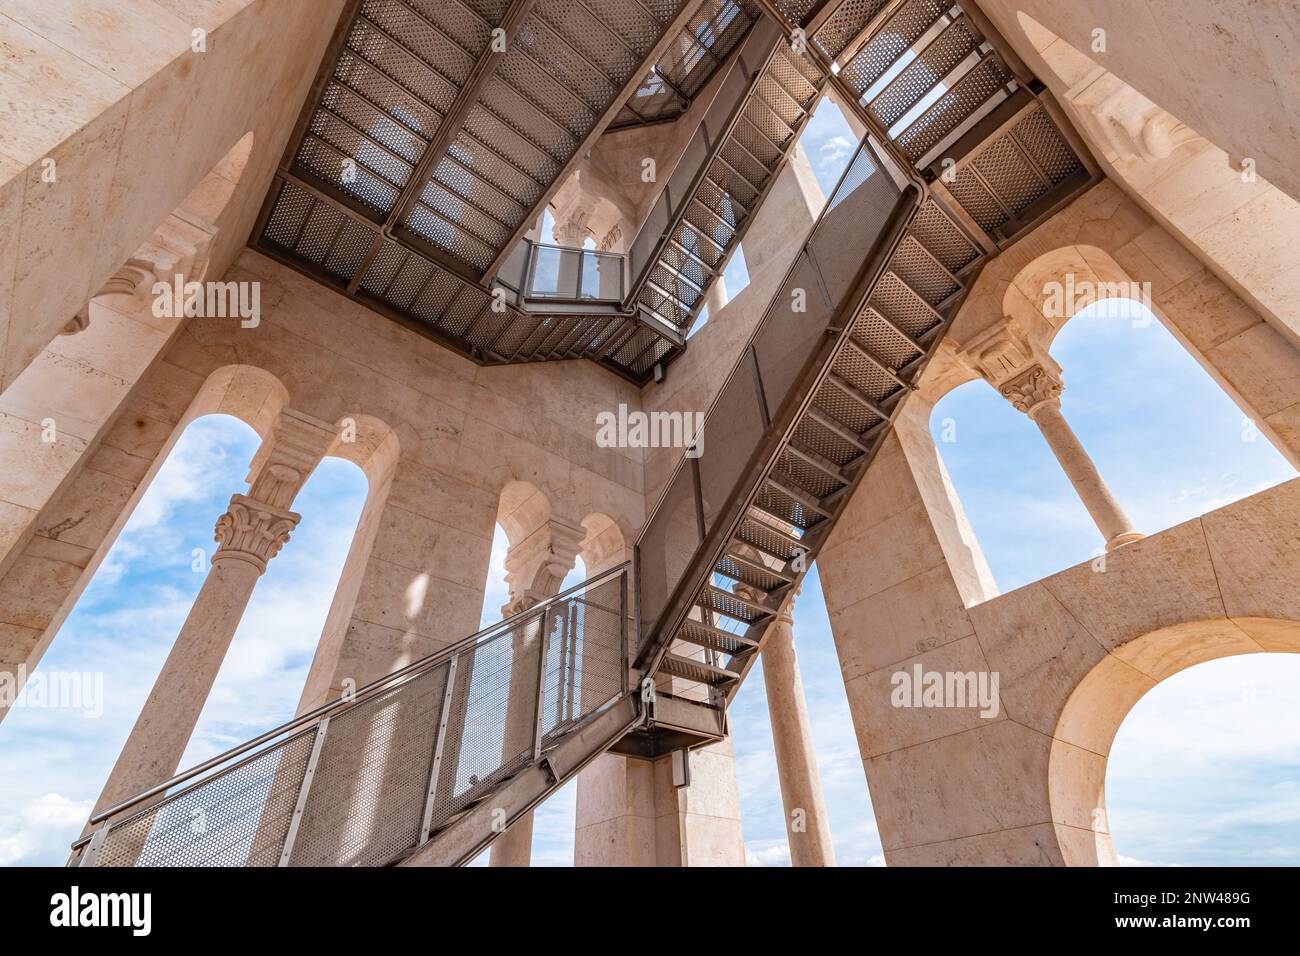 Architecture and staircase of Saint Domnius Bell Tower in Split, Croatia. Stock Photo